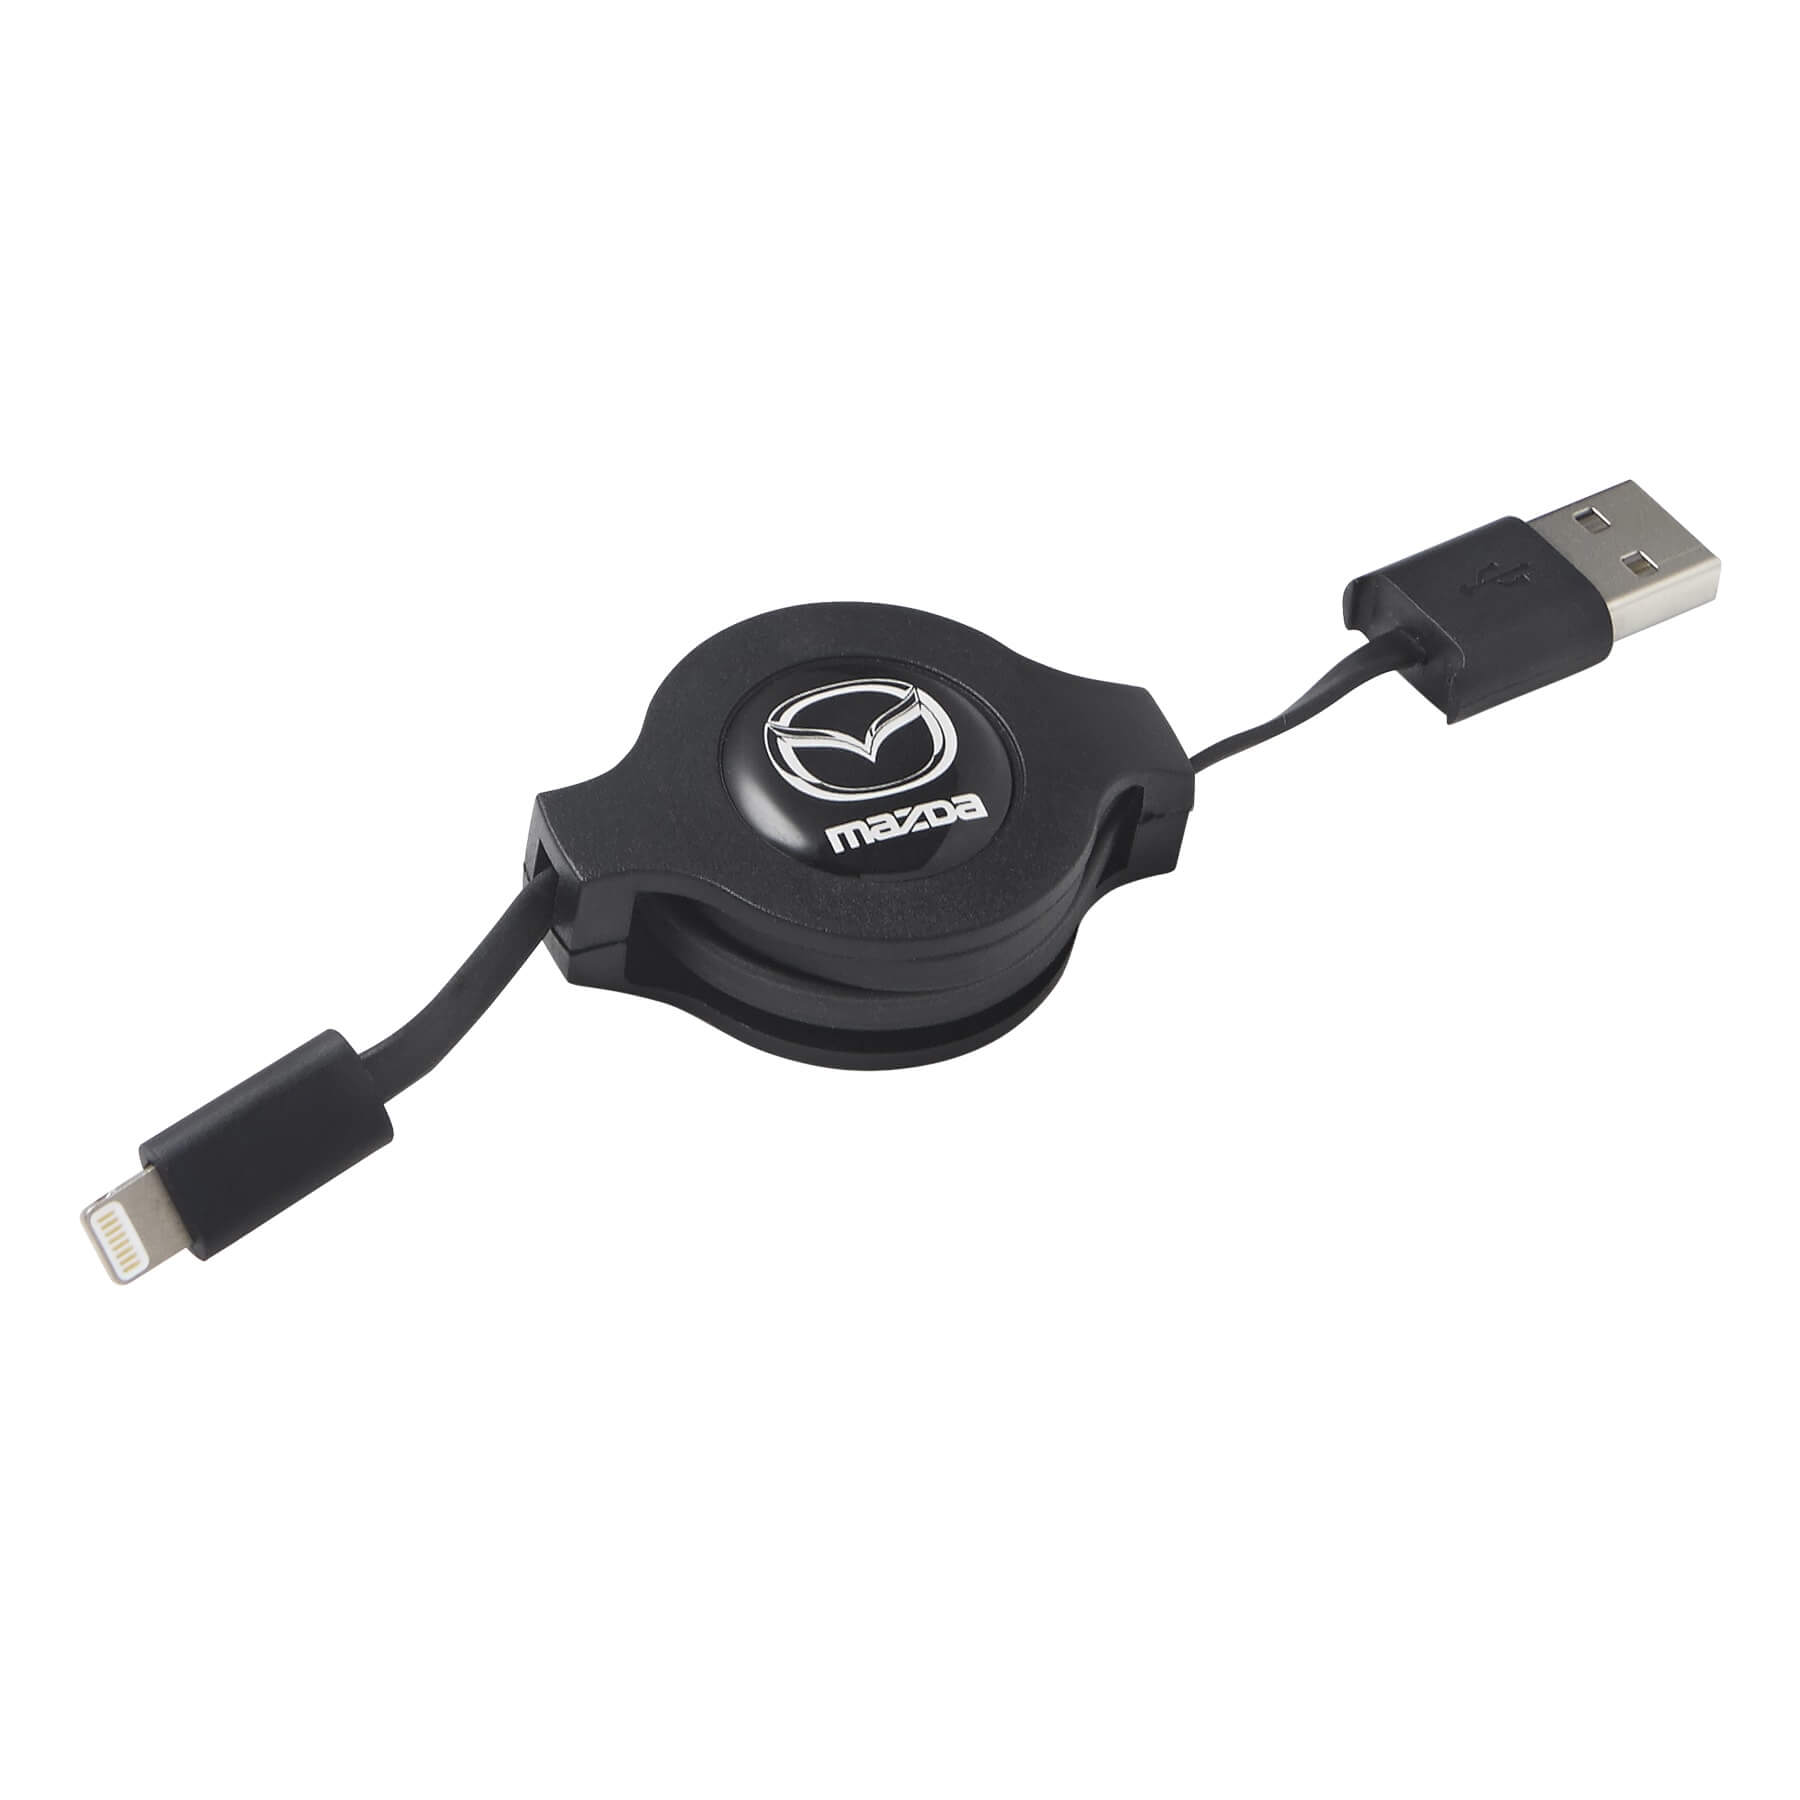 Audio retractable lightning cable